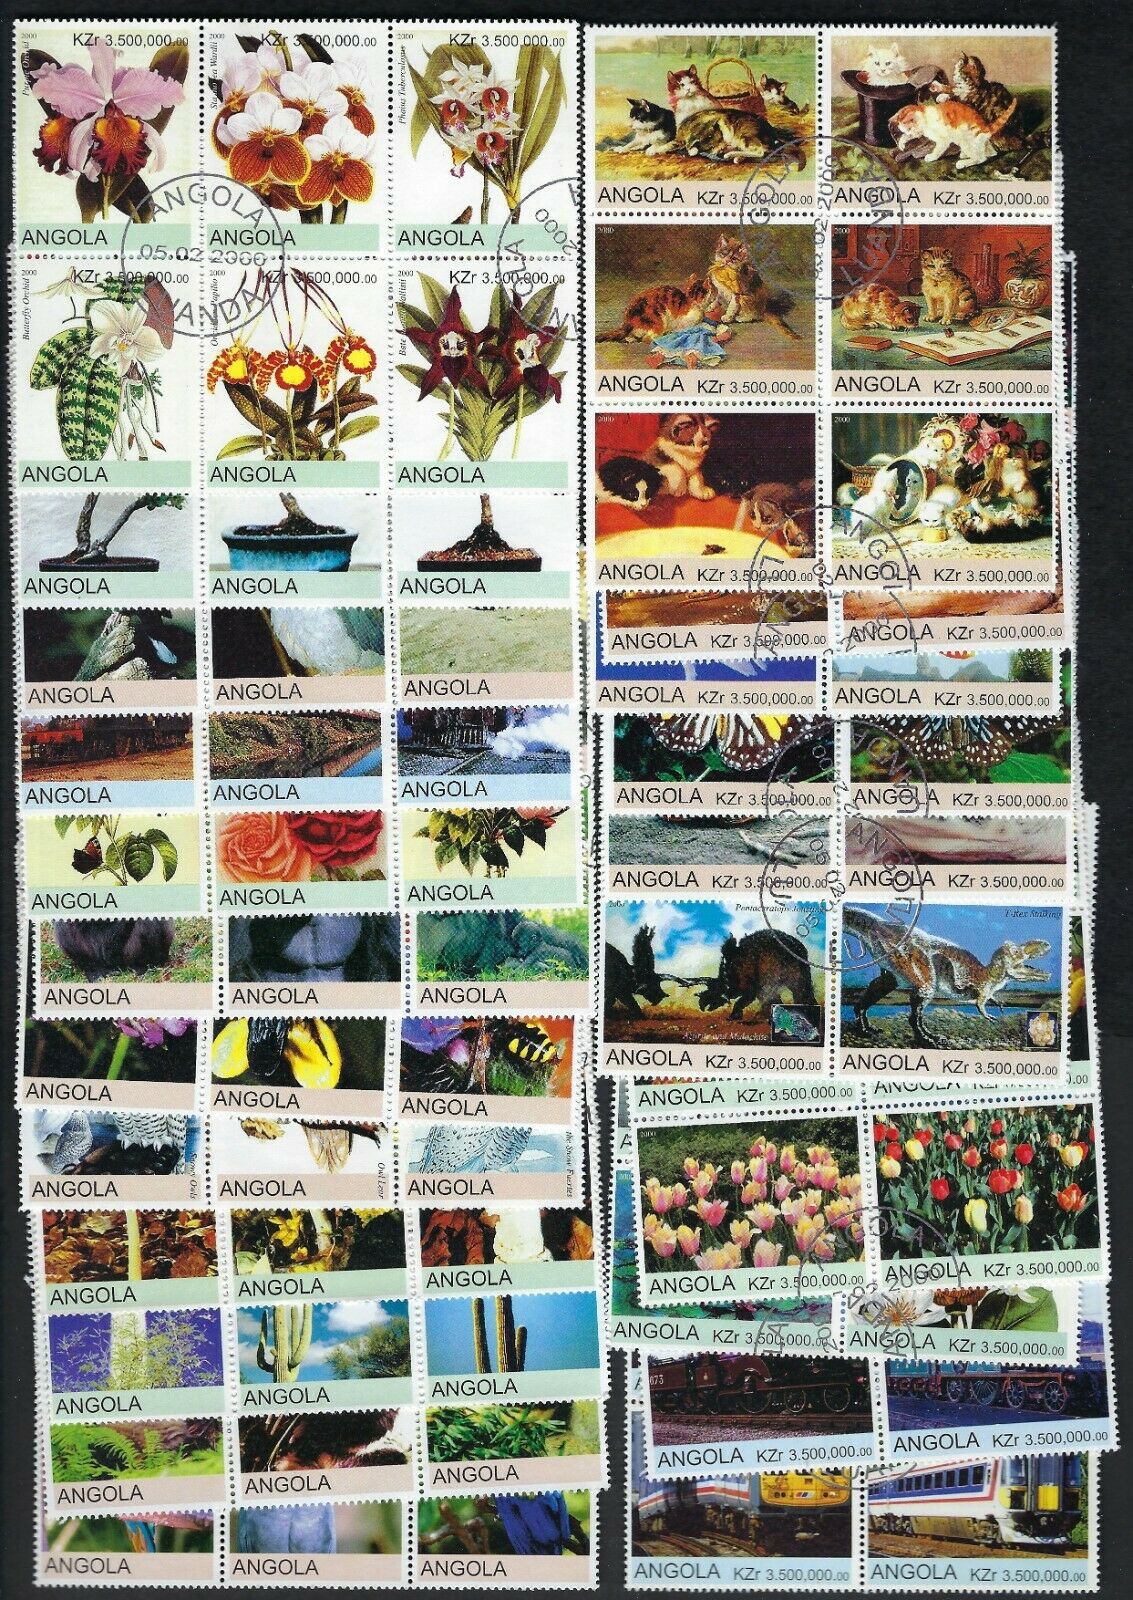 132 Different Angola Pictoral Stamps - Many Topical